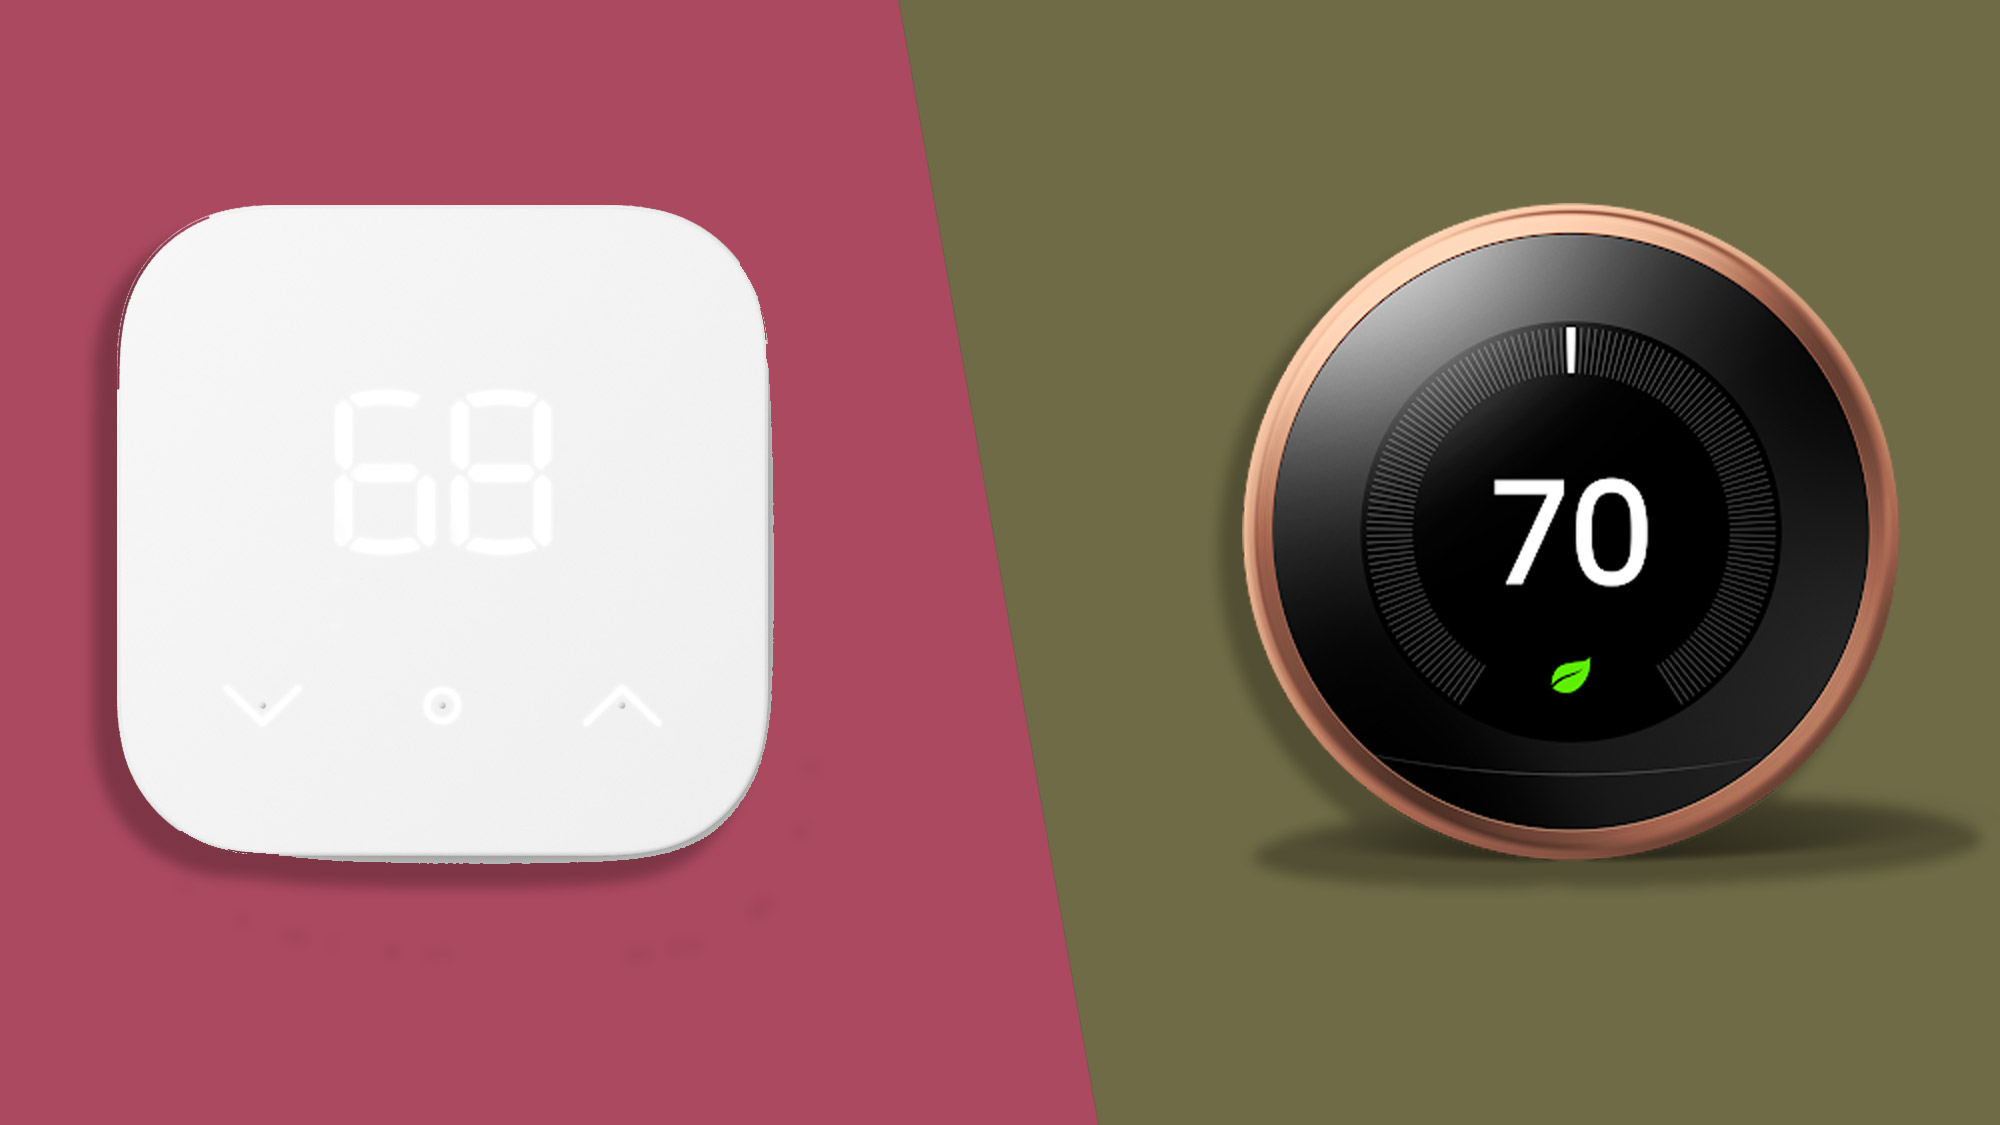 We've Been Reviewing Smart Thermostats for Years. A Nest